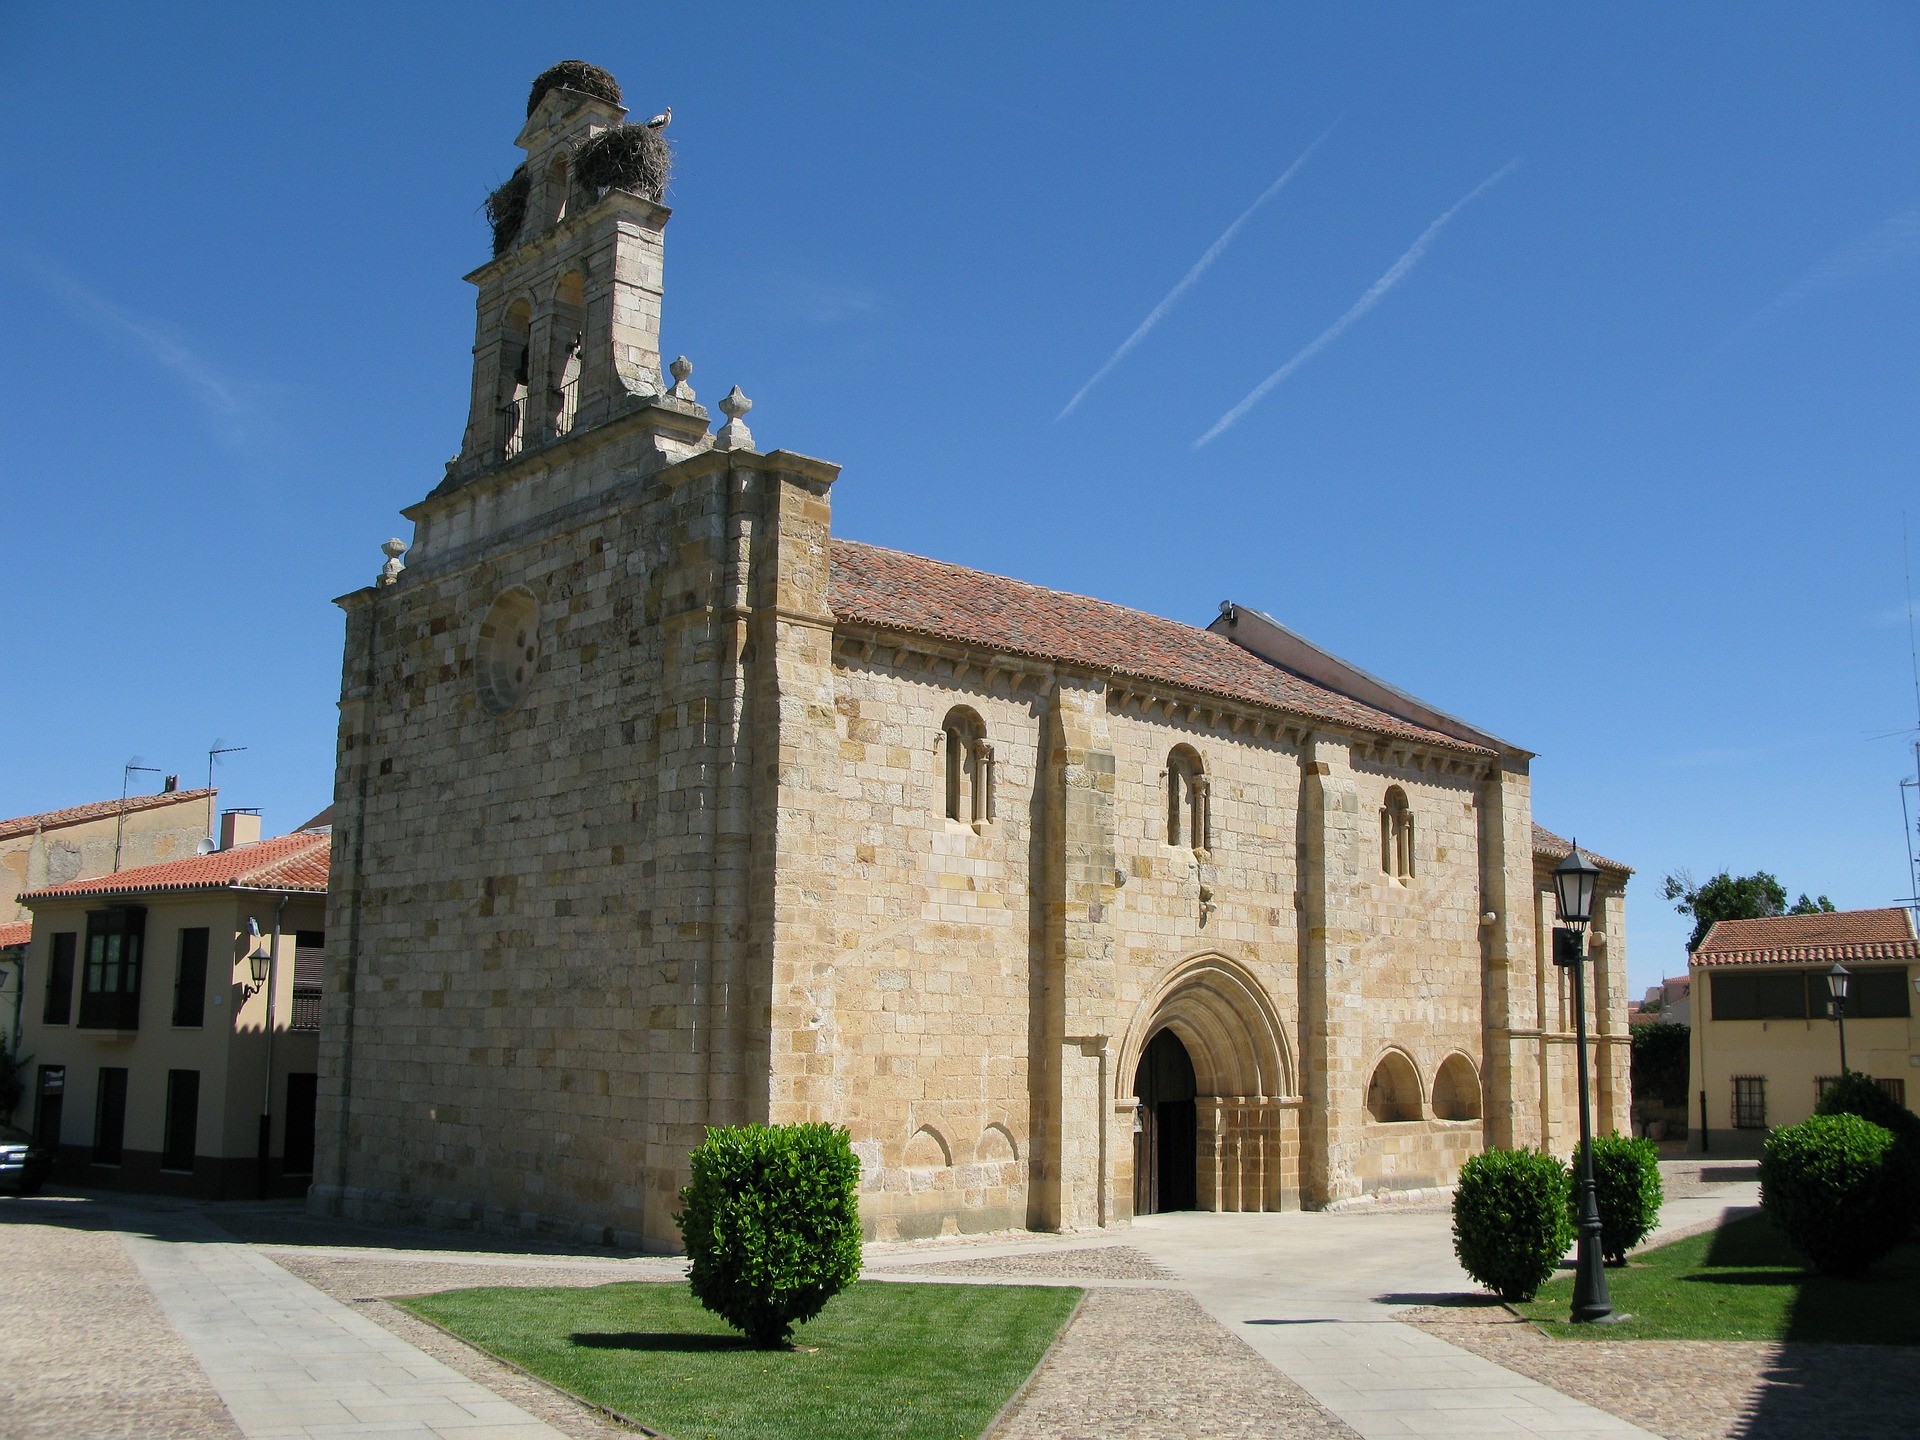 Free tour of Zamora and activities